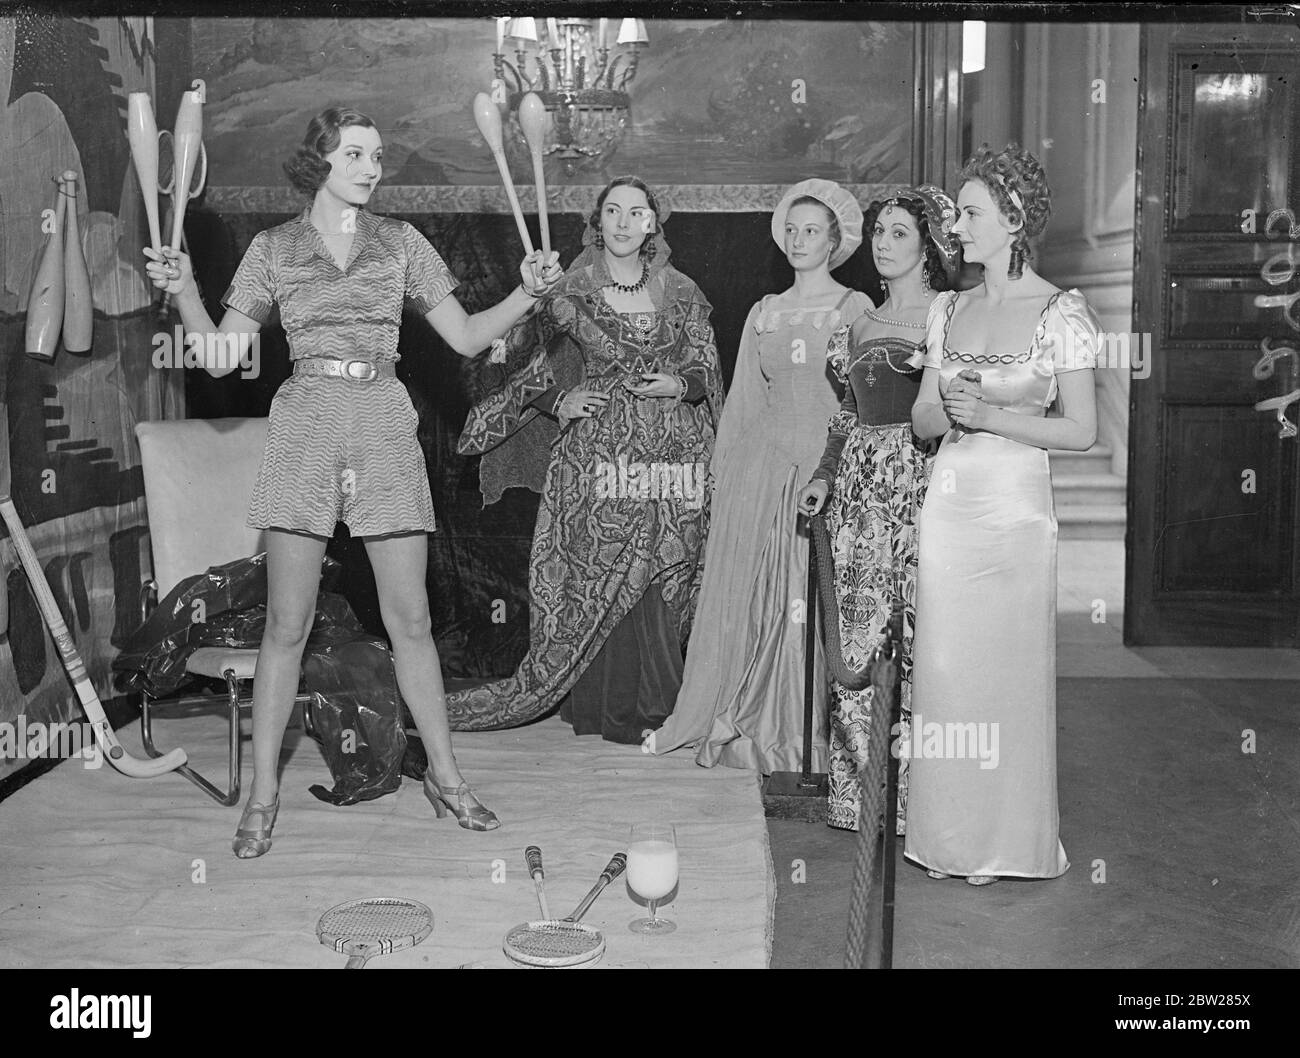 Beauties of the past. The beauty of the future in London. Well-known women, in costume, are appearing as beauties of bygone days at the Palace of Beauty which has opened at Grosvenor Square, London, in aid of Battersea General Hospital. Photo shows, left to right, Lucretia Borgia (Miss Snowden), Lady in Waiting (mrsClifford Wight), Diana de de Poitiers (Miss Zita Whitley) and Madame Recamier (Miss E Ripper) watching the Beauty of the Future (Miss Zoe Rogers). 12 January 1938 Stock Photo